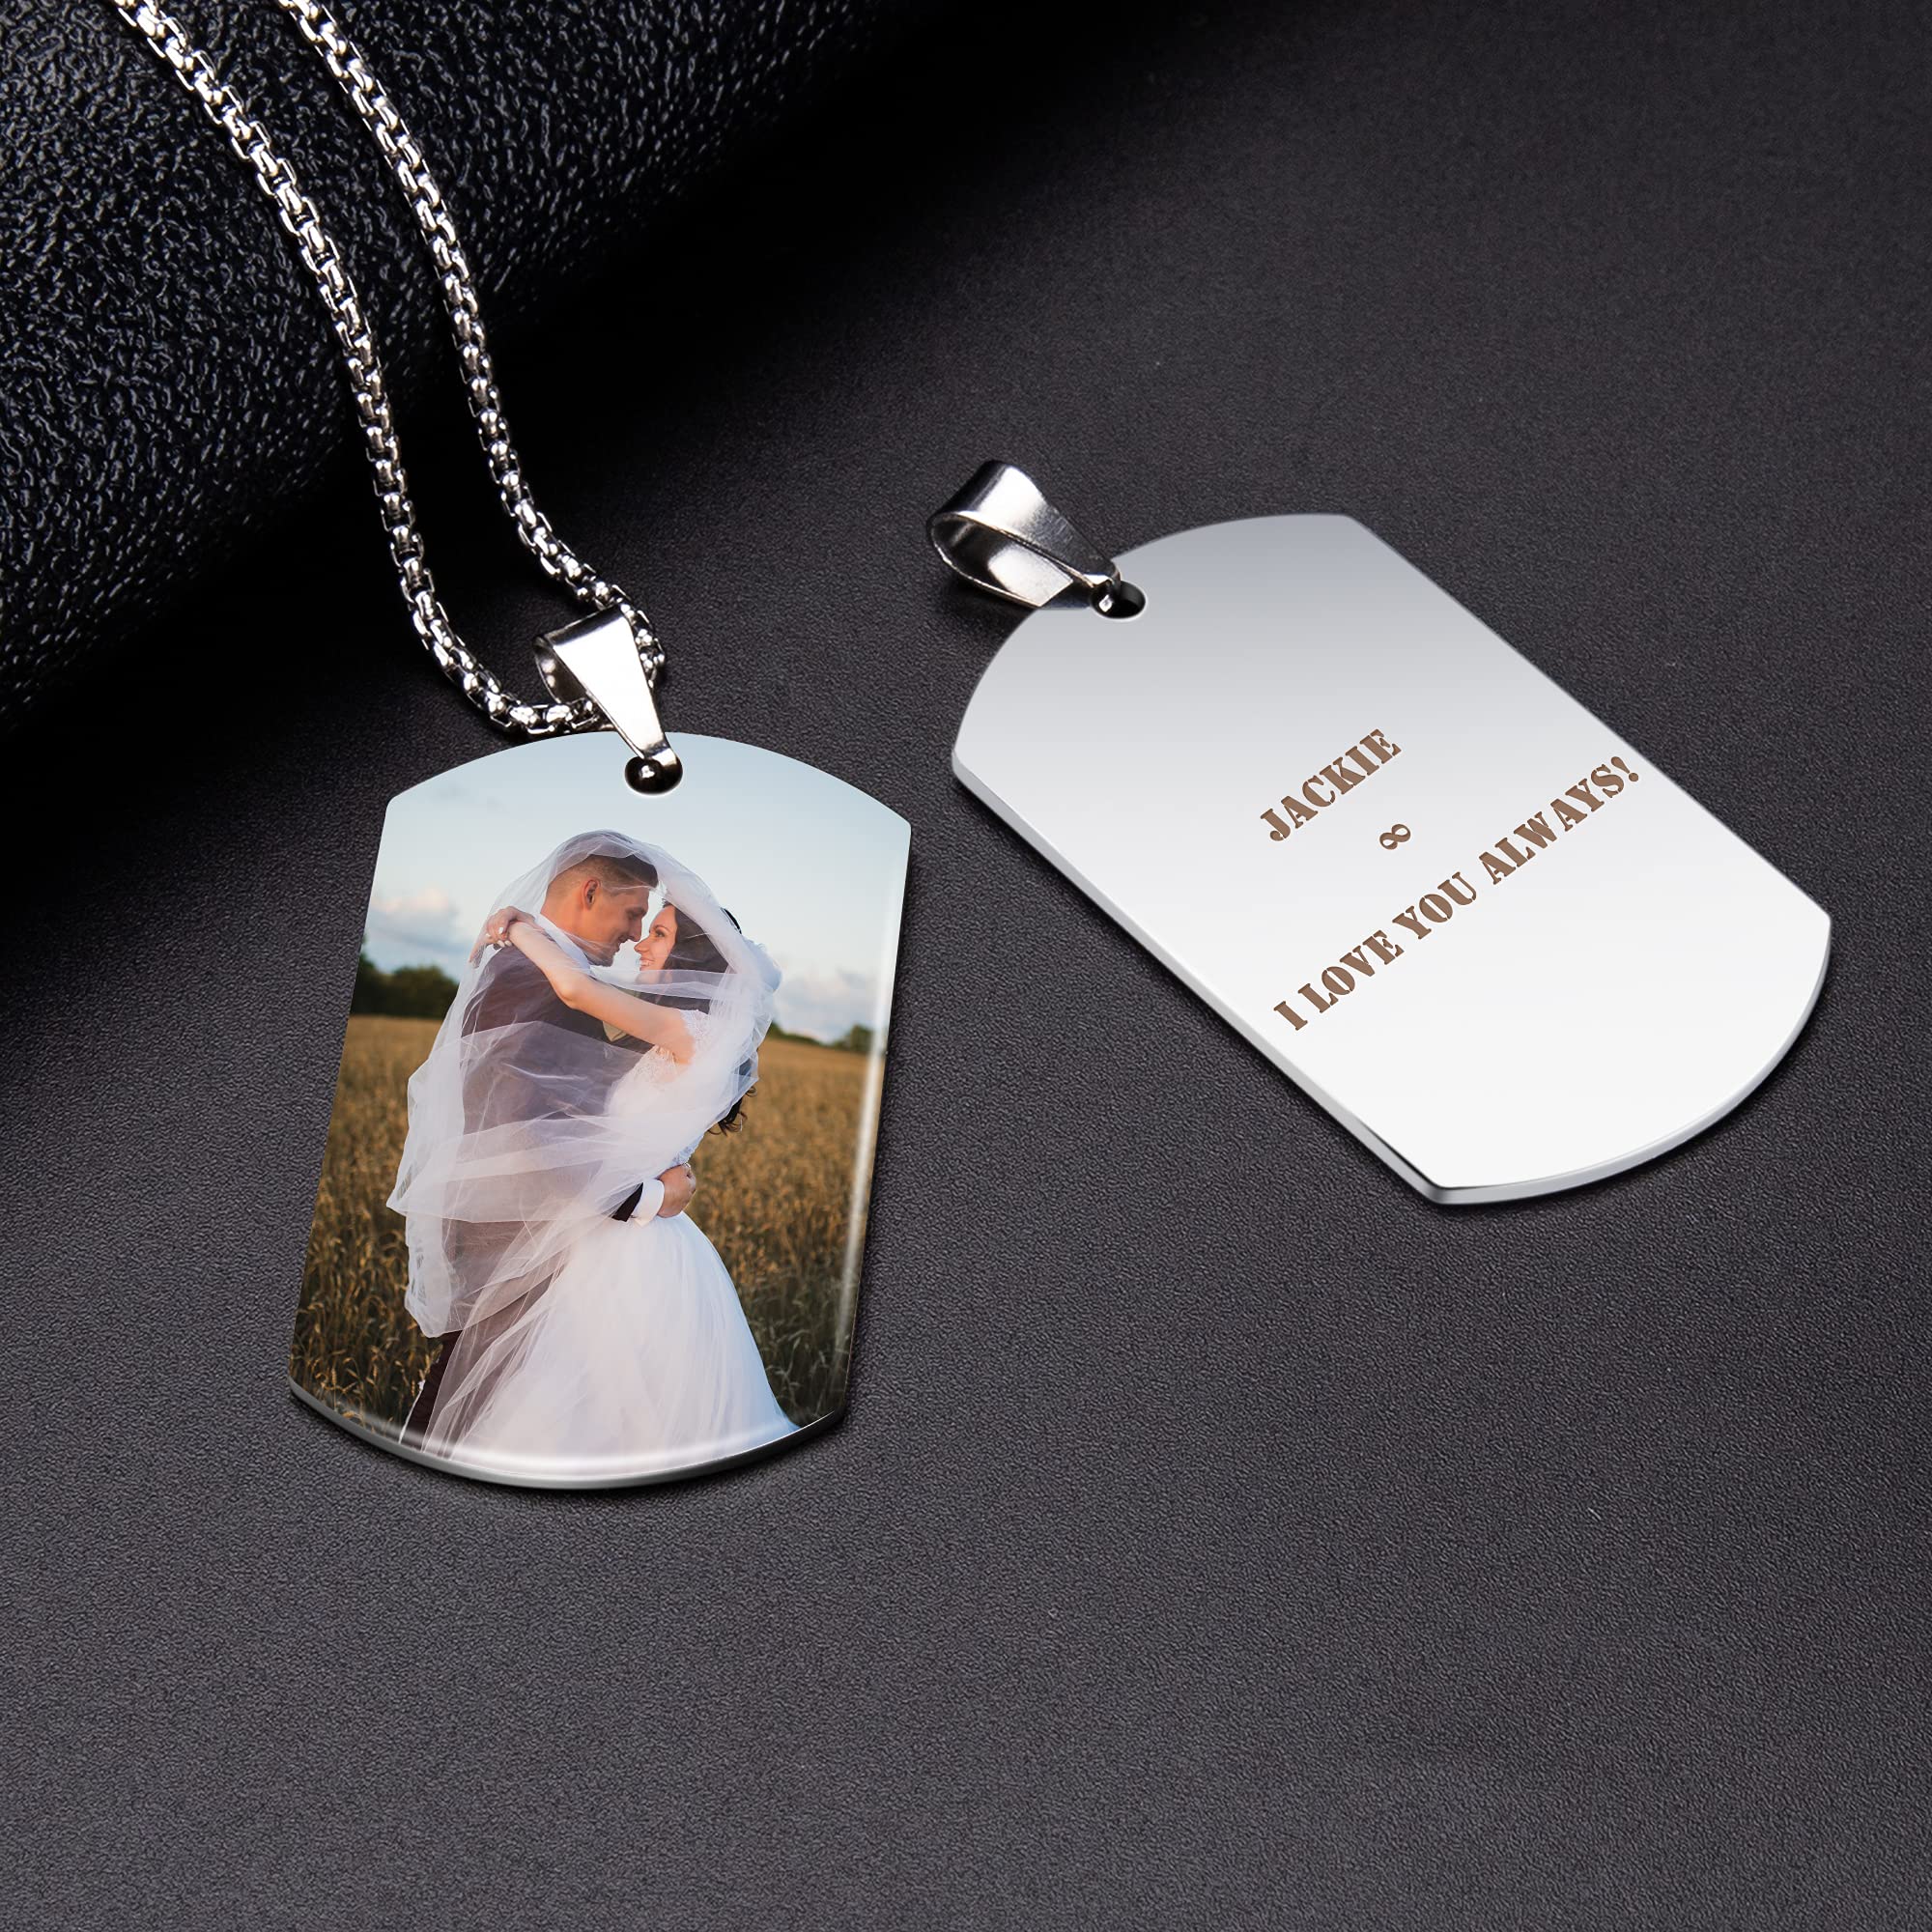 Aro Torliy Personalized Memorial Dog Tag Necklace for Men, Custom Engraving Picture & Text Stainless Steel Photo Pendant Necklace Jewelry for Boyfriend/Brother